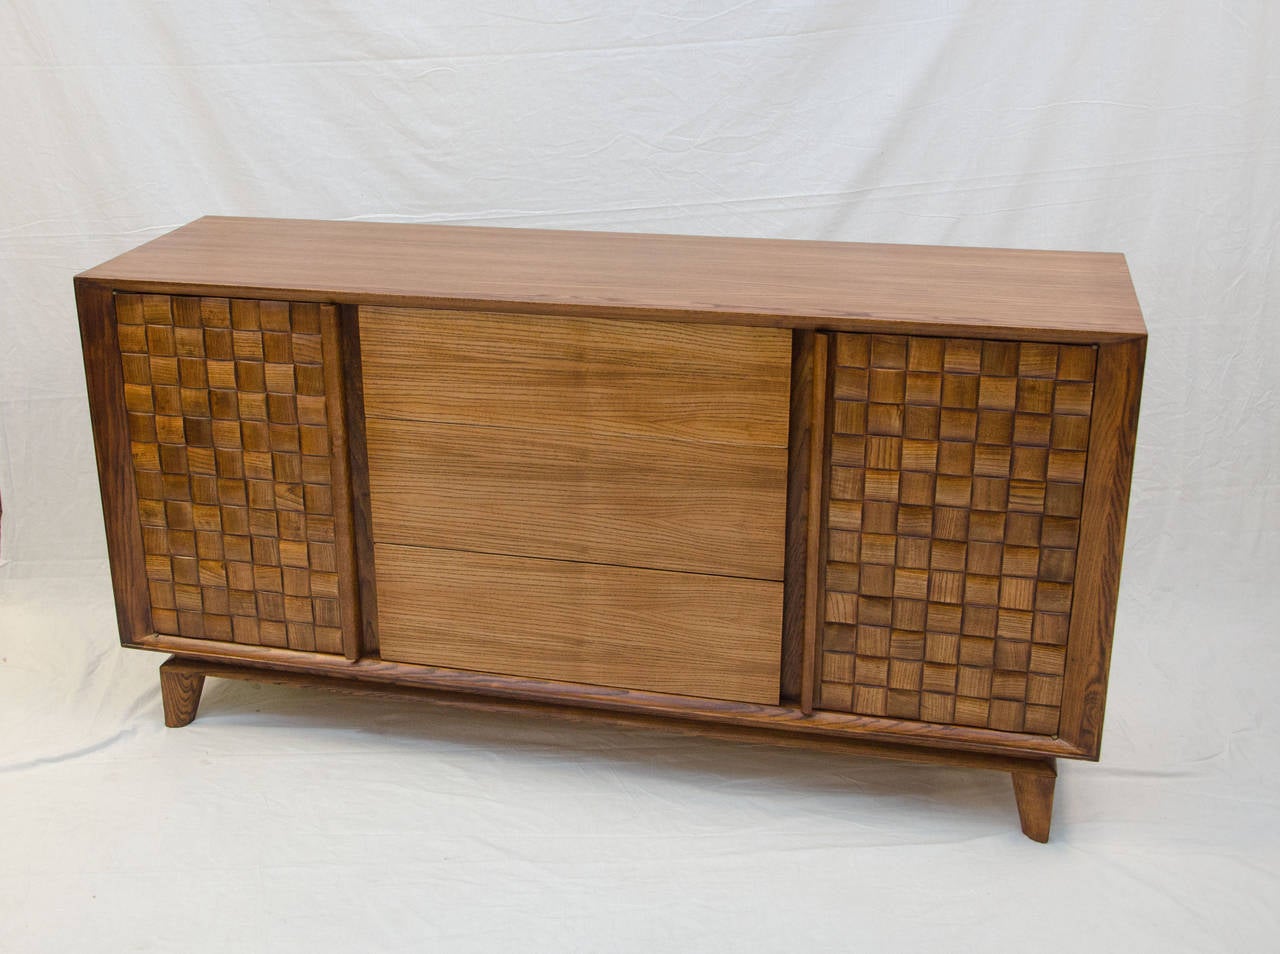 Very stylish buffet or credenza designed by Paul Laszlo and manufactured by Brown Saltman Co. Has three spacious drawers and two storage cabinets with woven block front doors and adjustable shelves. Retains the Brown Saltman painters palette decal.